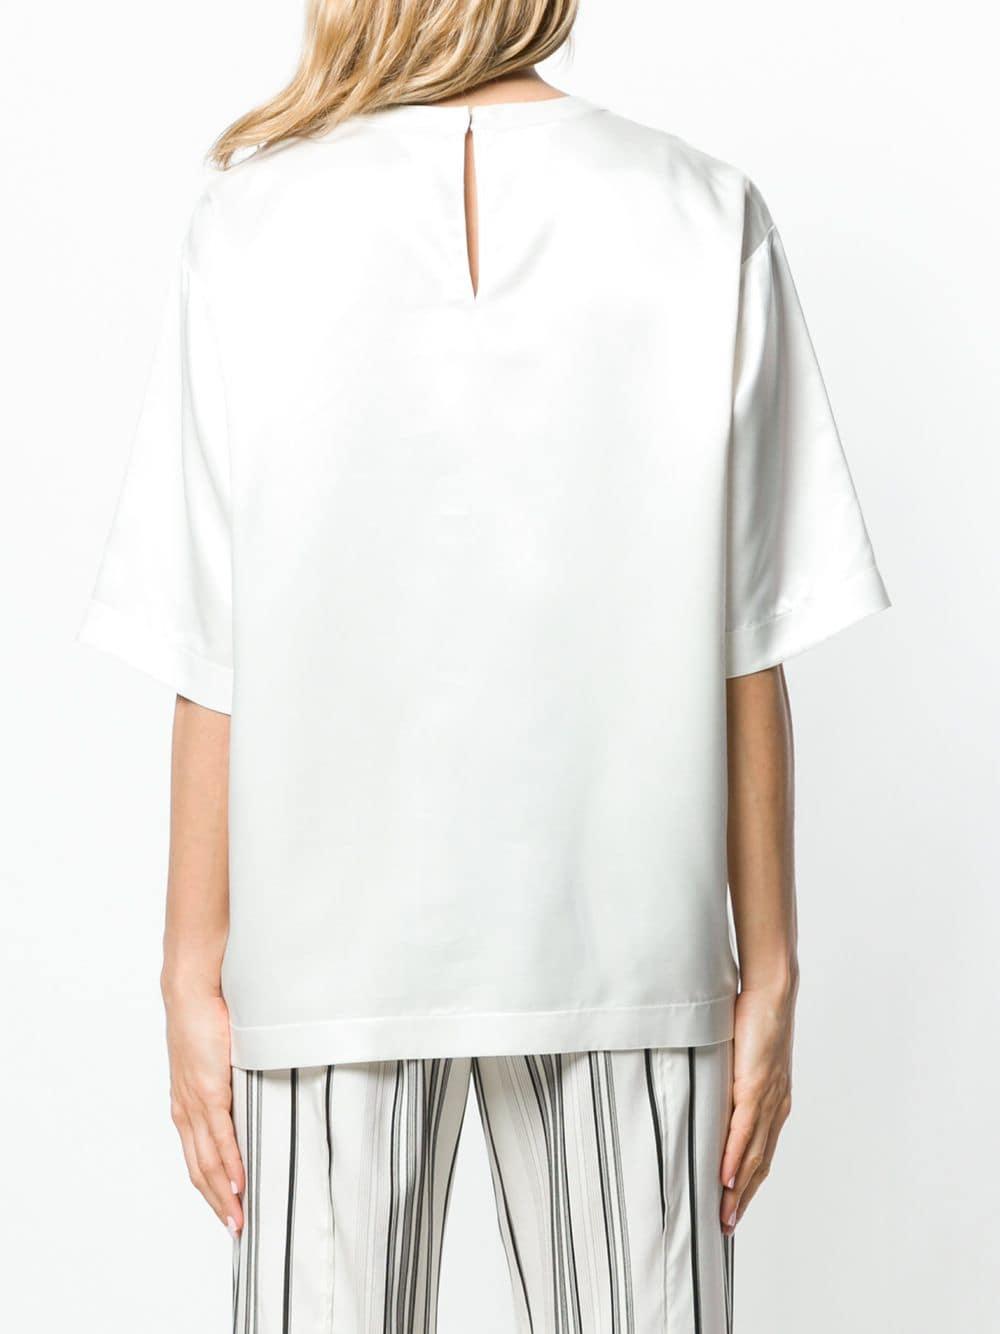 Jil Sander Synthetic Loose-fit Tee in White - Lyst